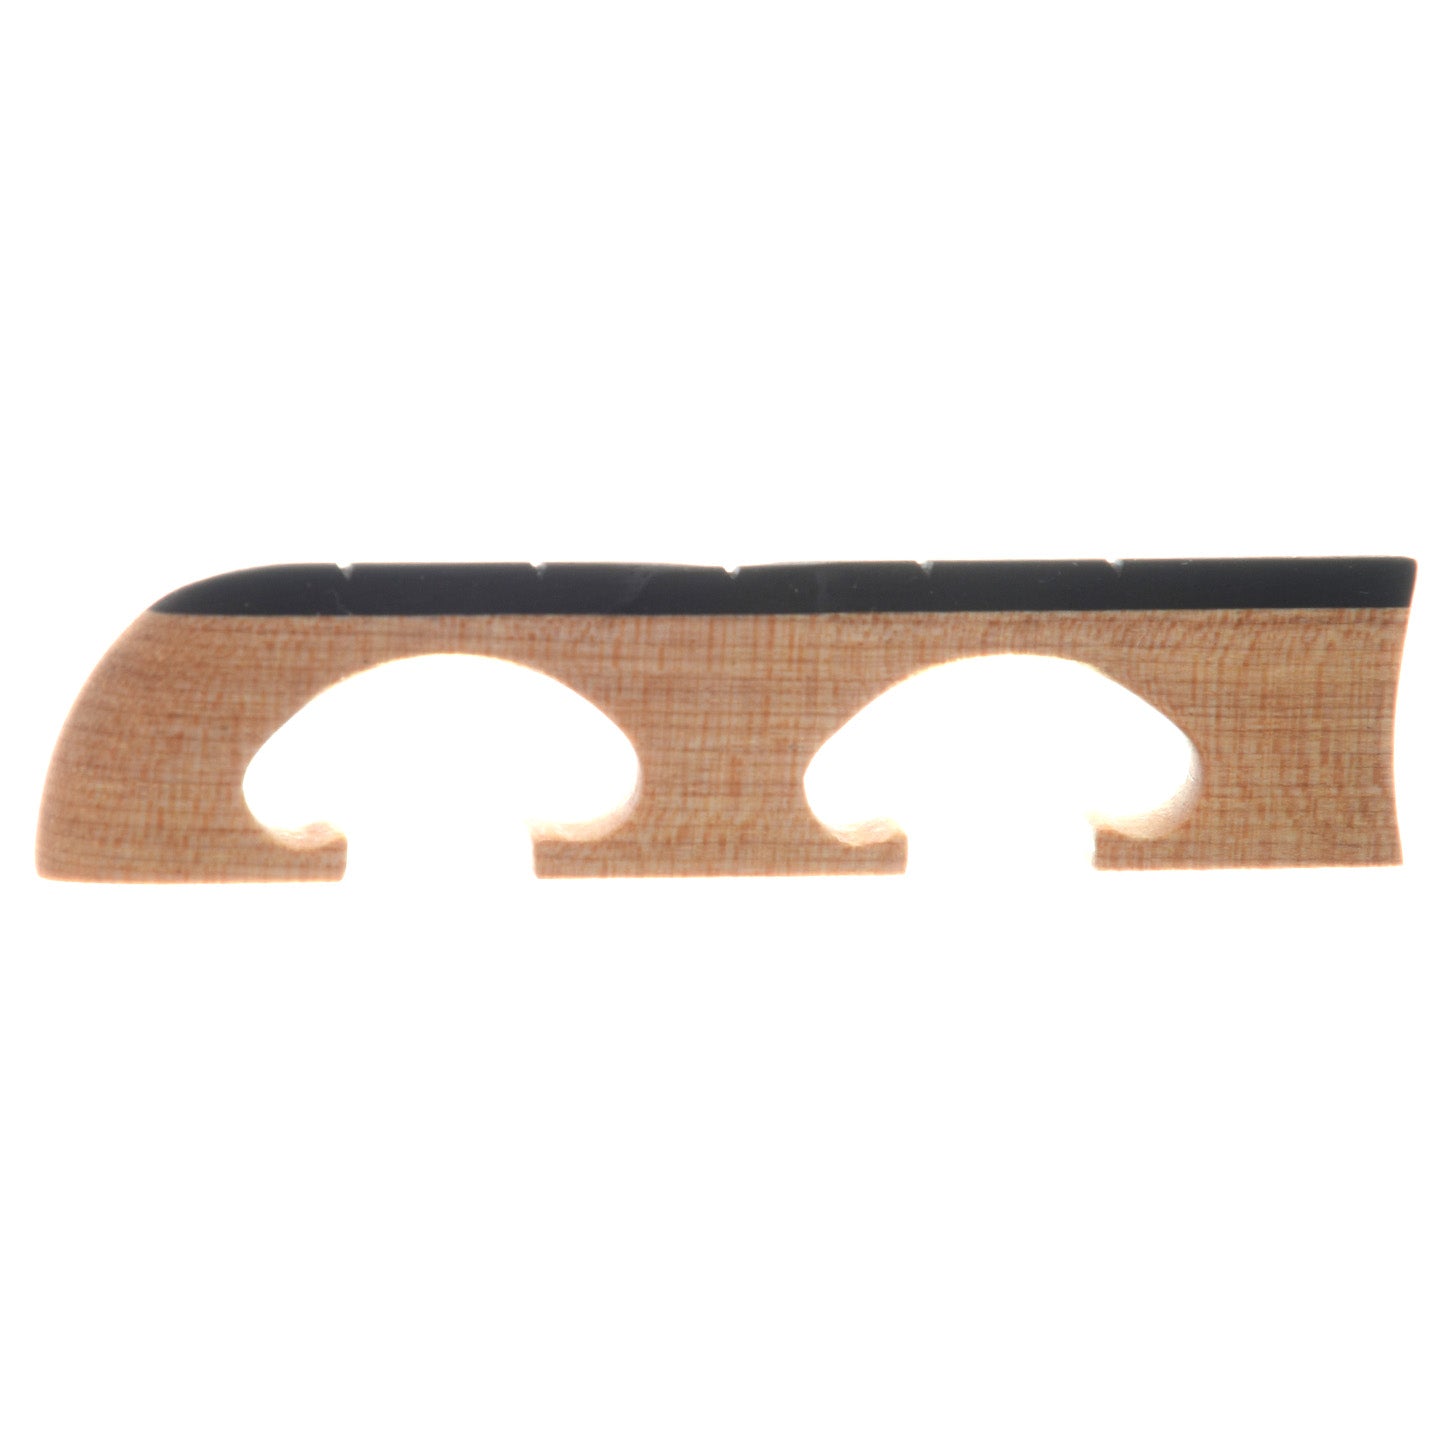 Image 2 of SAMPSON "OLD GROWTH" BANJO BRIDGE, 11/16" BIRCH STANDARD-SPACED Handcrafted in Wisconsin from ol - SKU# SBBOG11-BIRCH : Product Type Accessories & Parts : Elderly Instruments